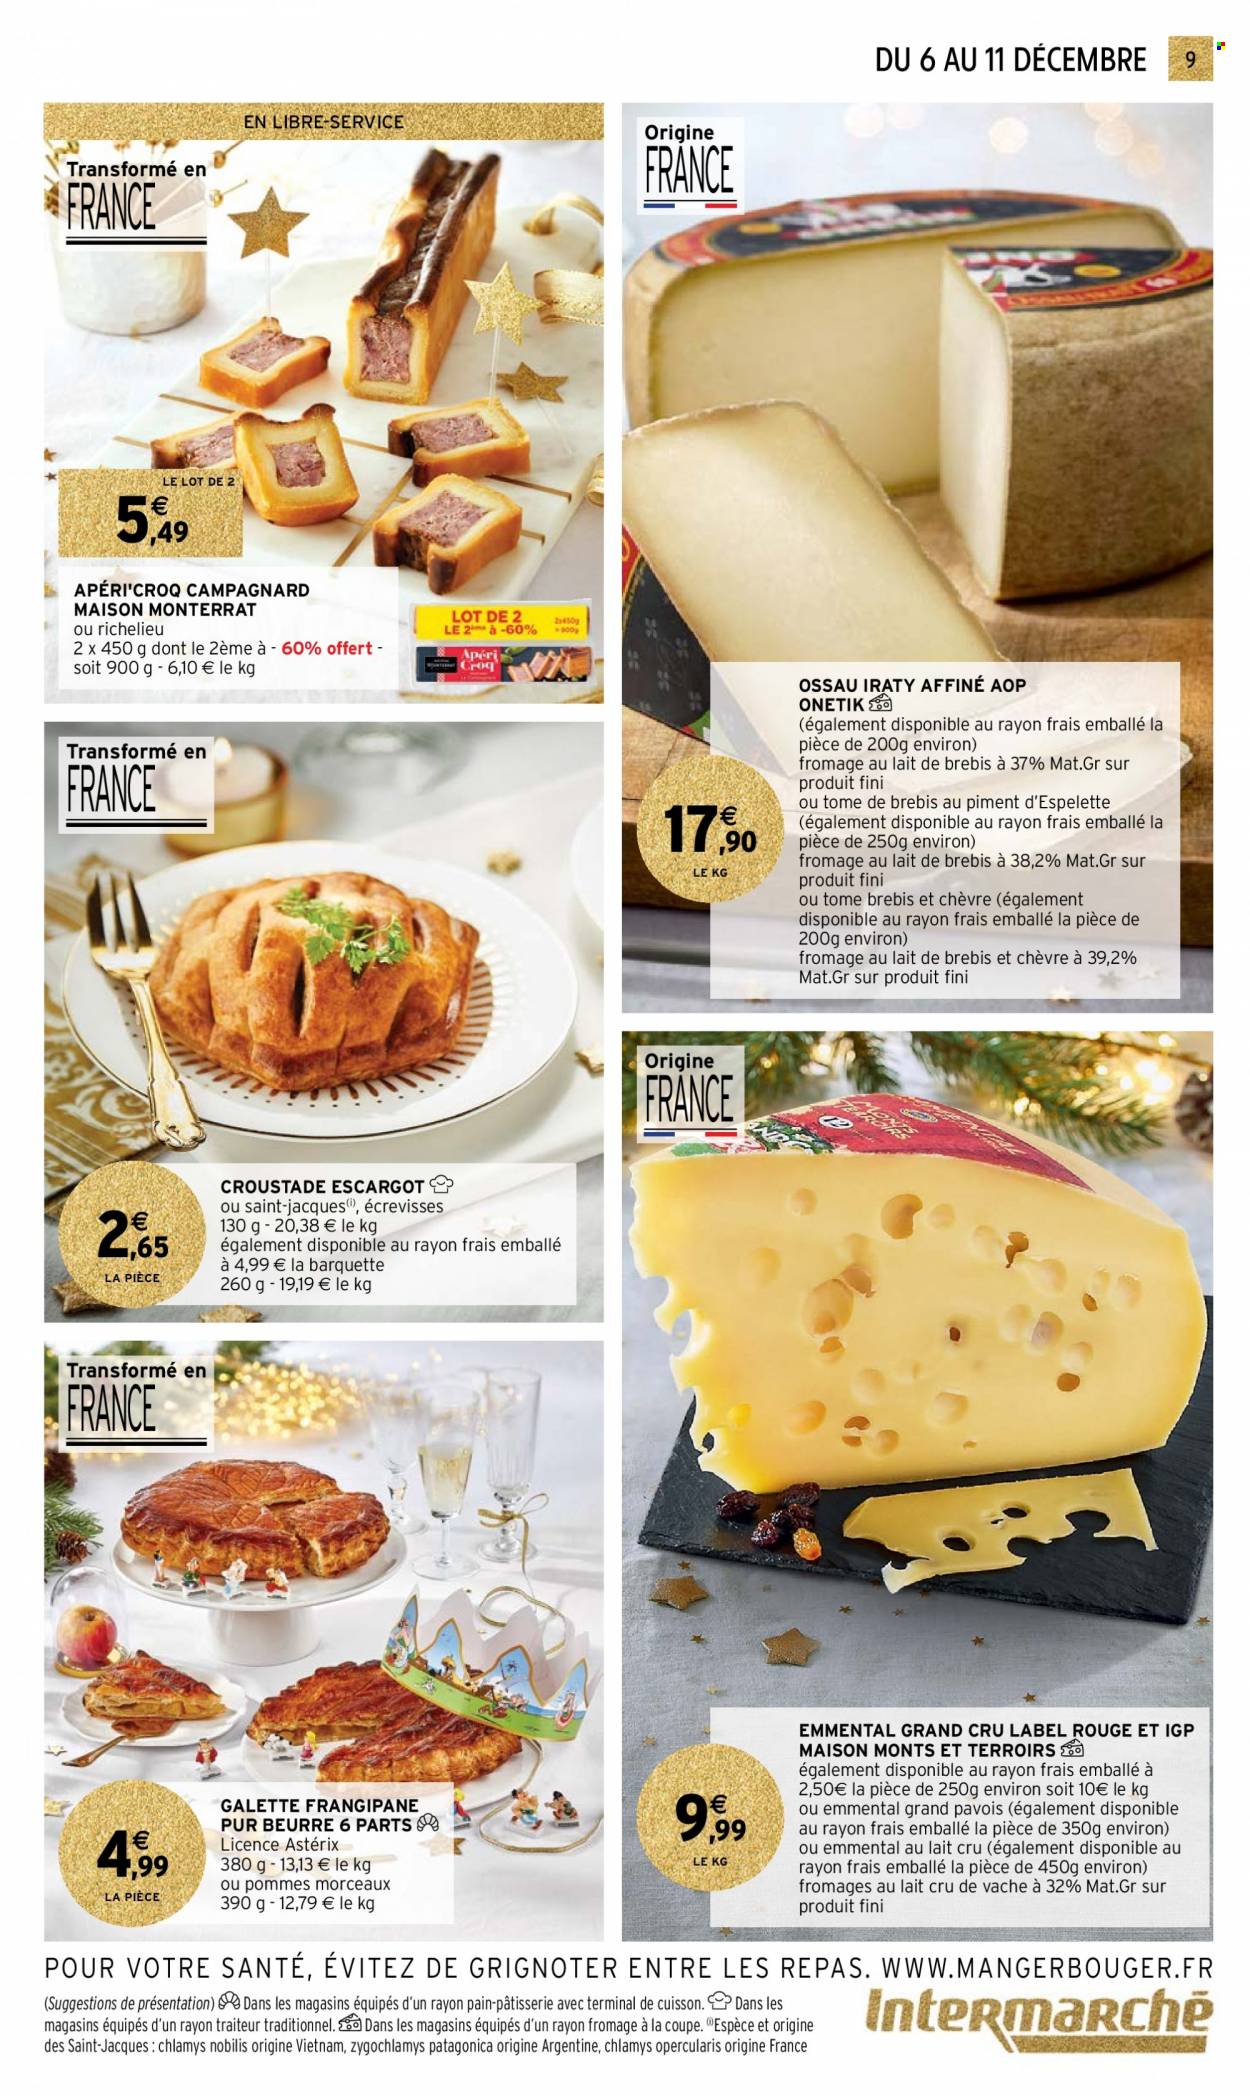 thumbnail - Catalogue Intermarché Contact - 06/12/2022 - 11/12/2022 - Produits soldés - galettes, escargots, campagnard, fromage, Ossau-Iraty. Page 9.